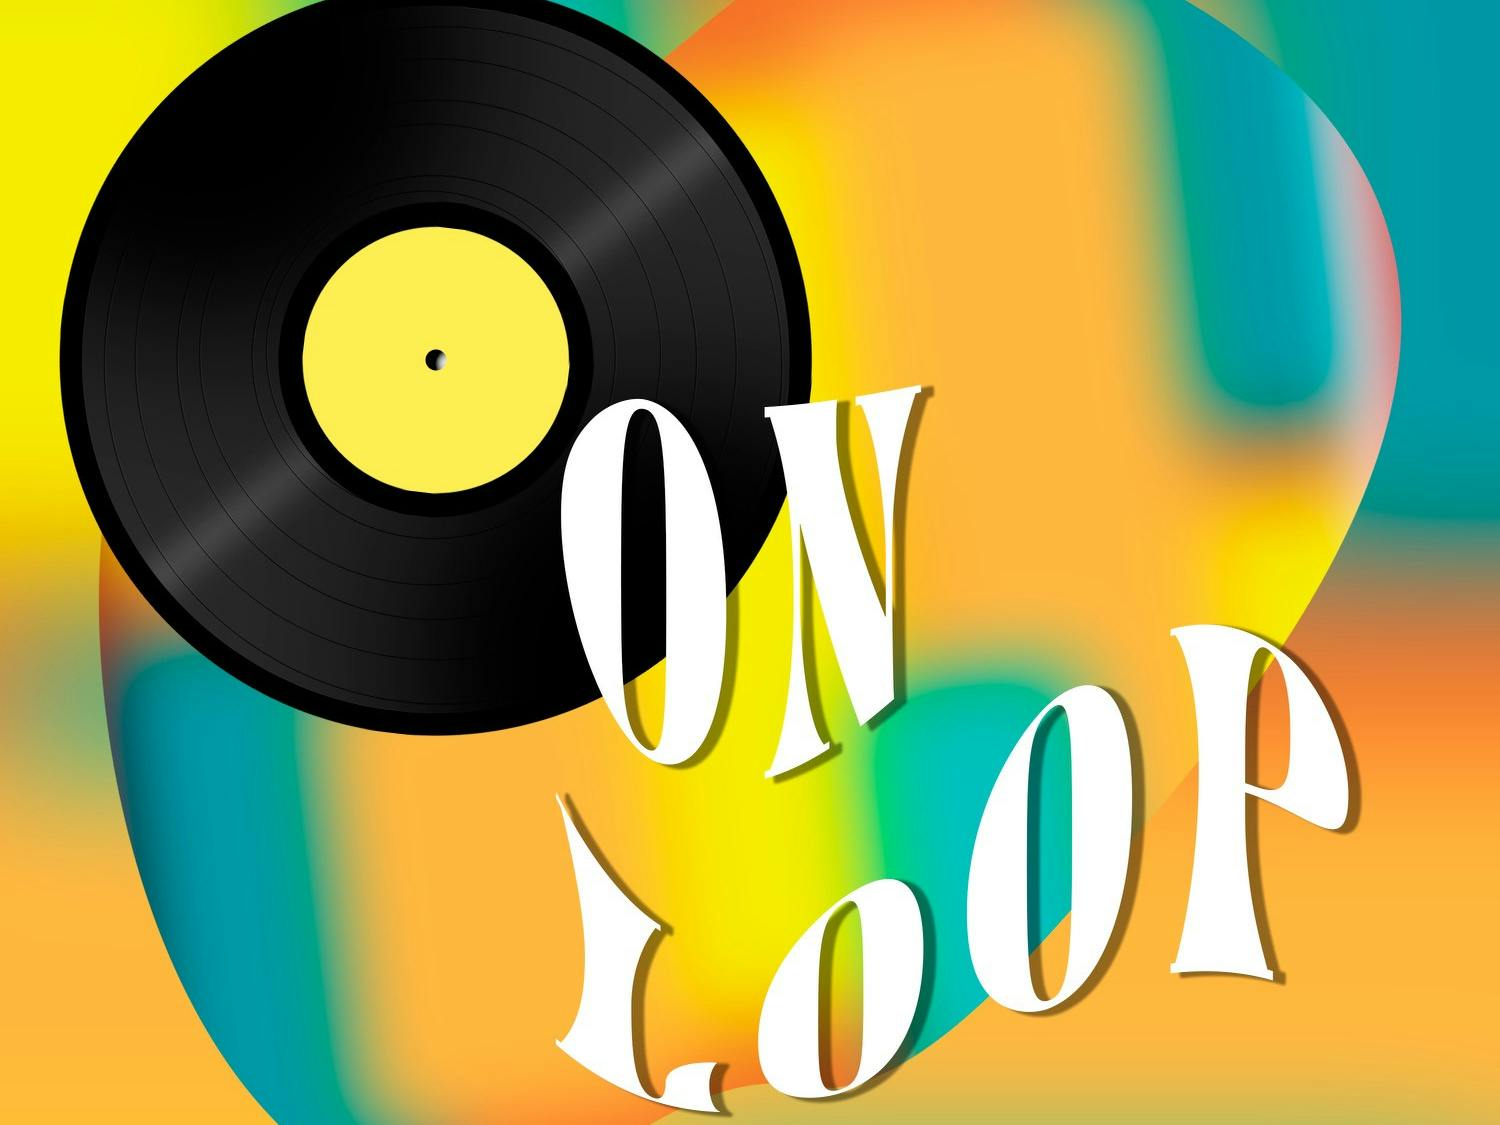 Williamson, 21, launched &quot;On Loop with Kara&quot; in July.